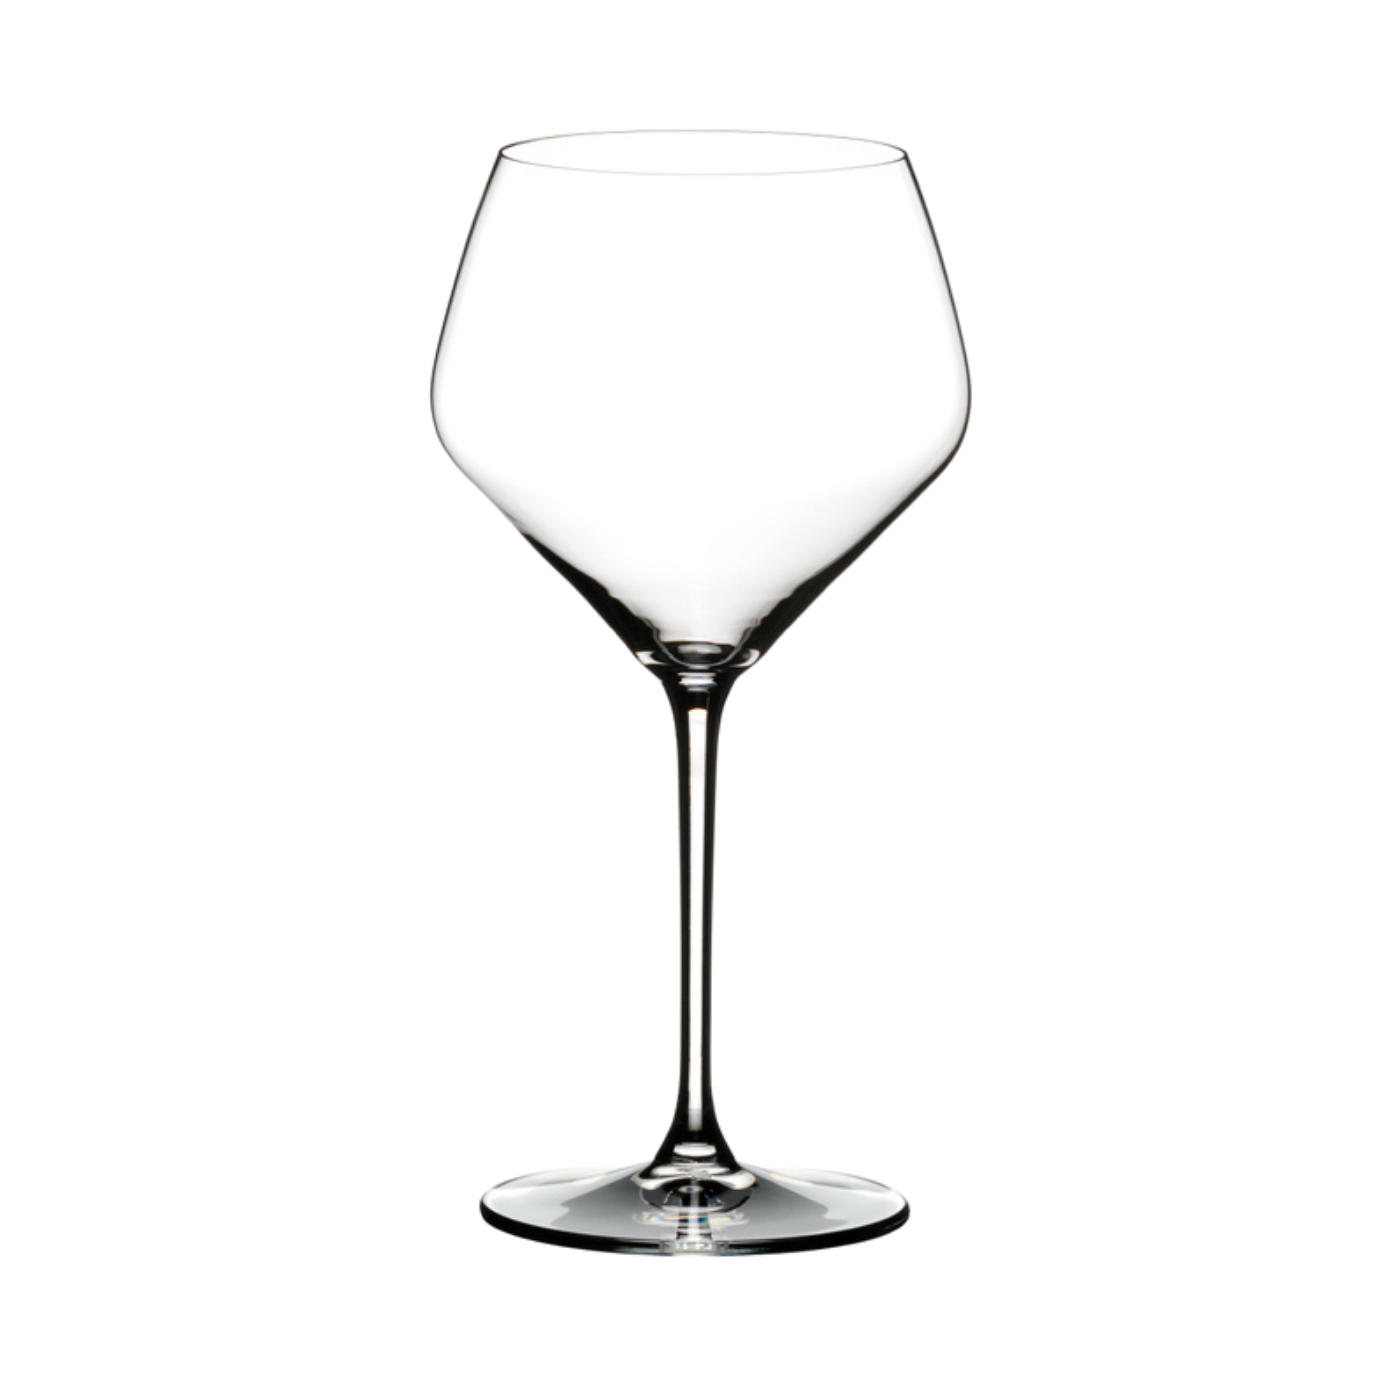 Riedel Extreme Oaked Chardonnay Glasses (set of 2)